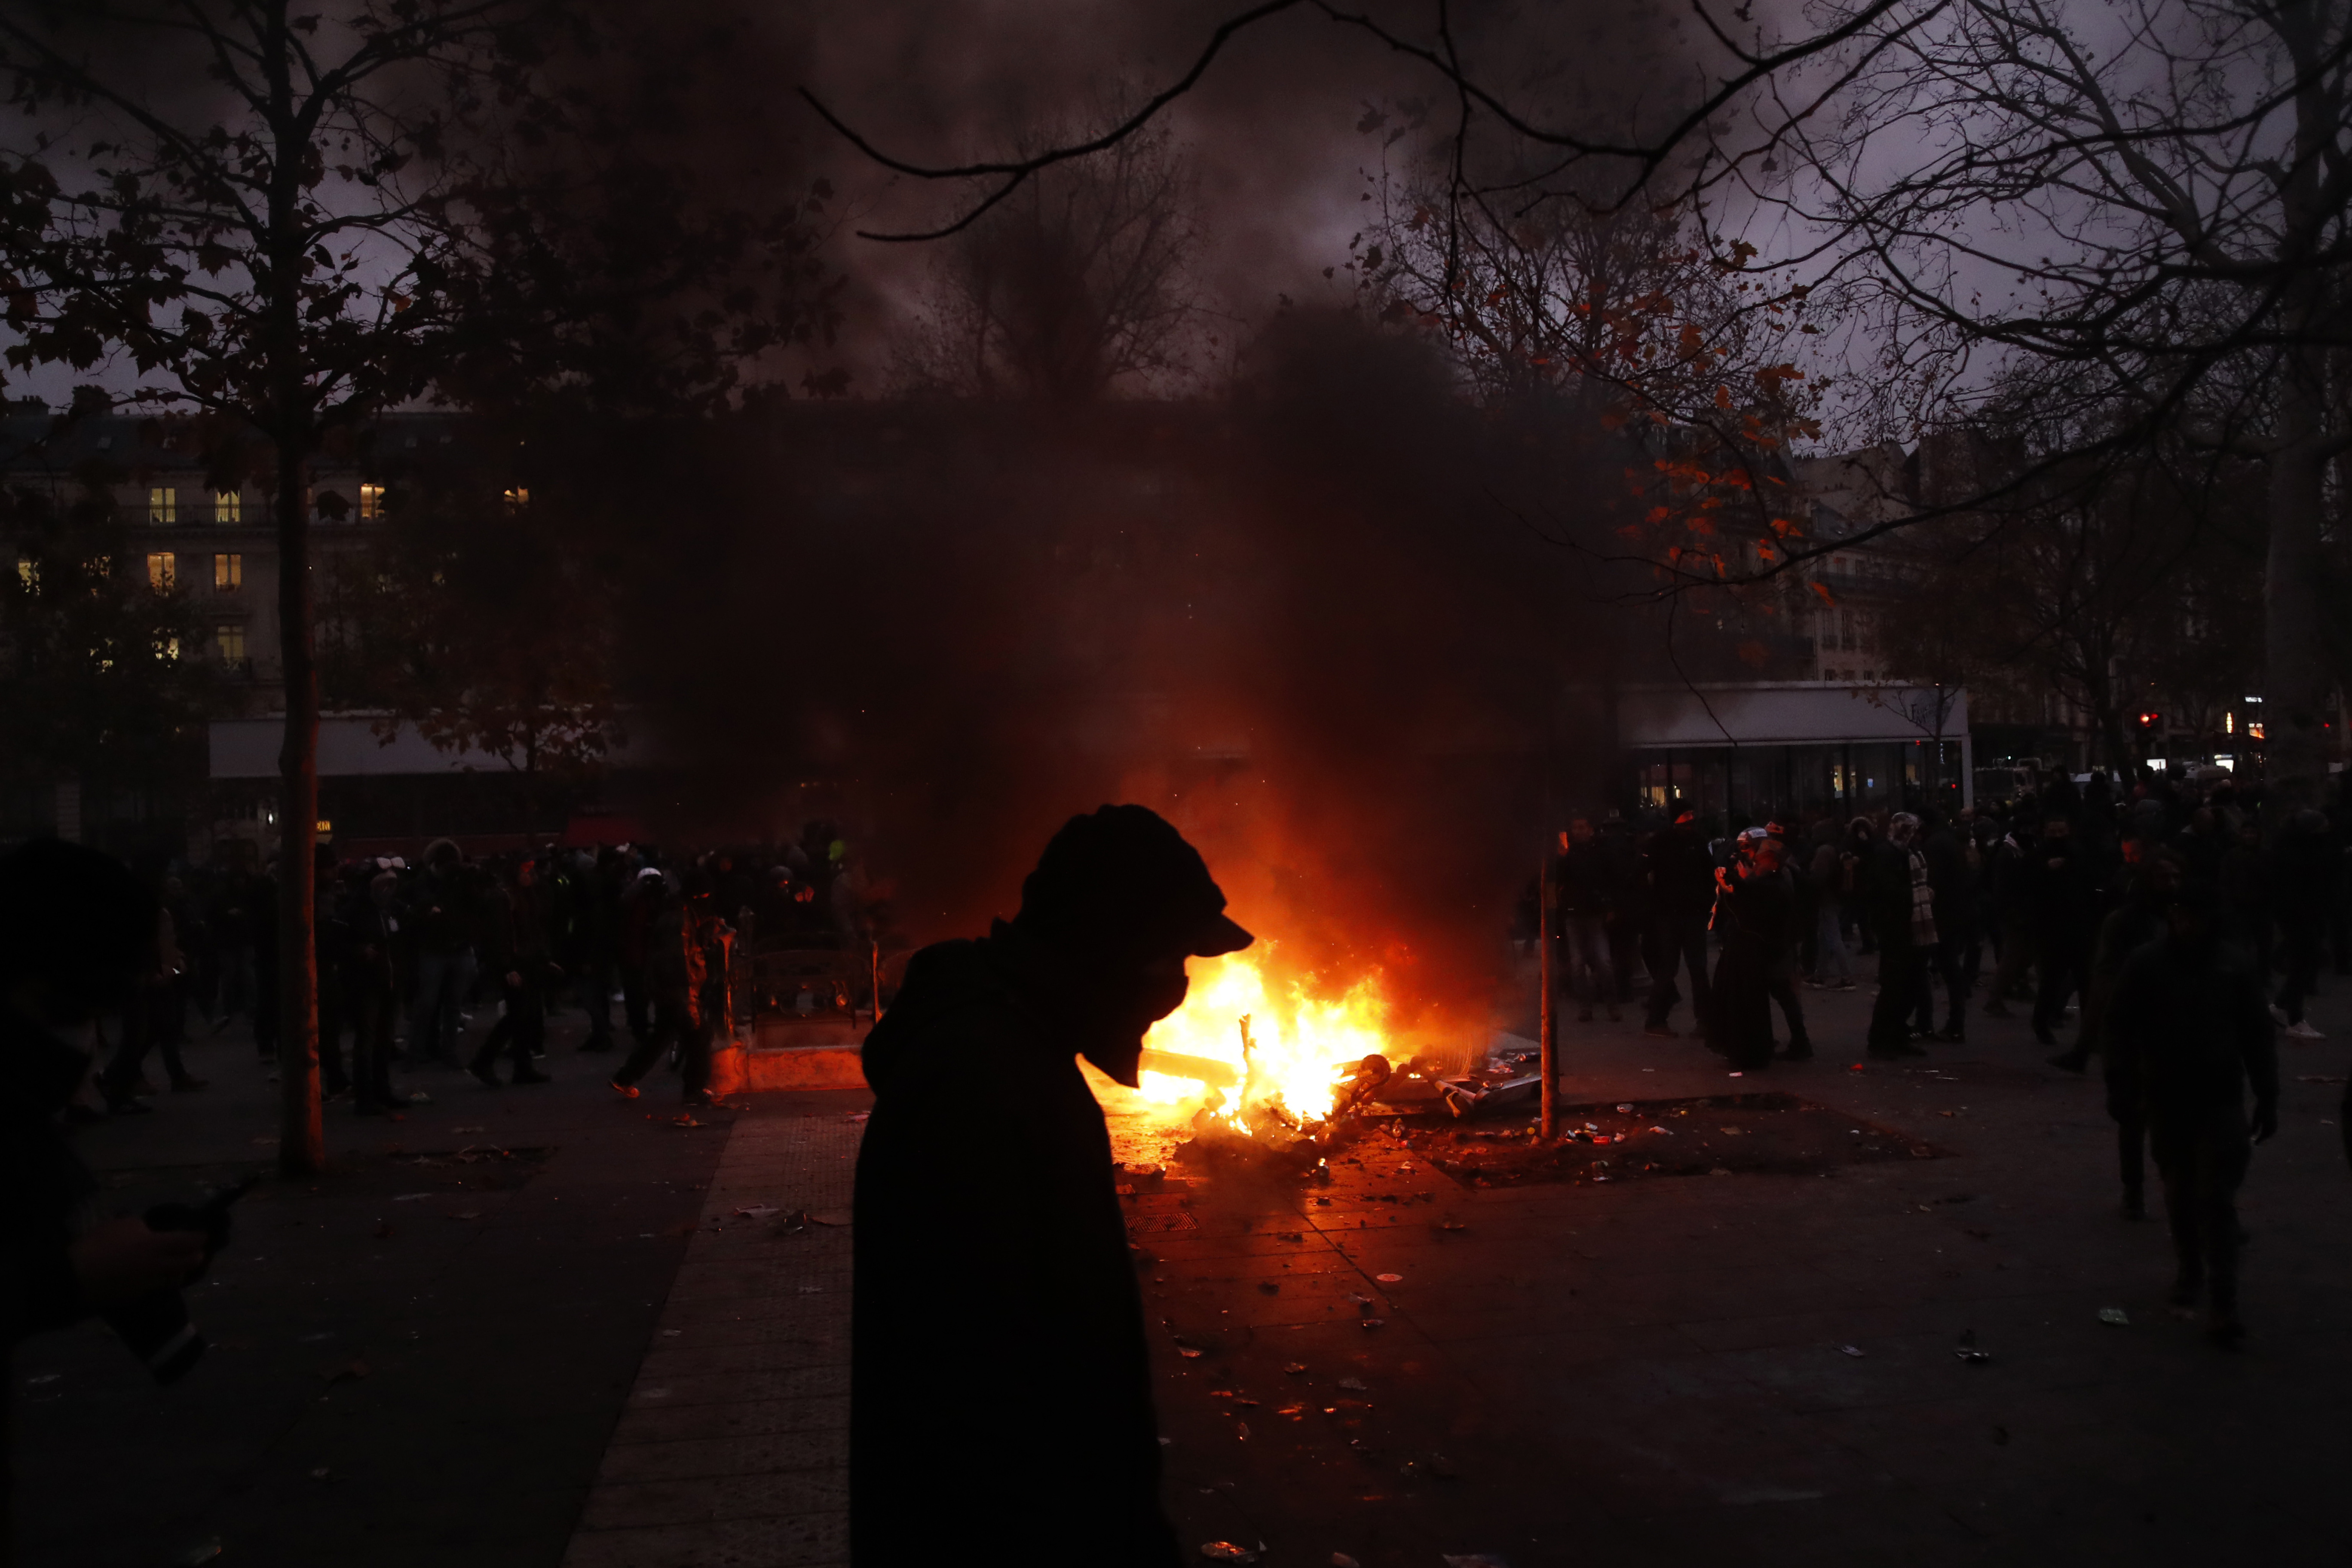 A demonstrator walks past a fire during a demonstration in Paris, Thursday, Dec. 5, 2019. The Eiffel Tower shut down, France's high-speed trains stood still and tens of thousands of people marched through Paris and other cities Thursday, in a massive and sometimes chaotic outpouring of anger at the government's plan to overhaul the retirement system. (AP Photo/Thibault Camus)